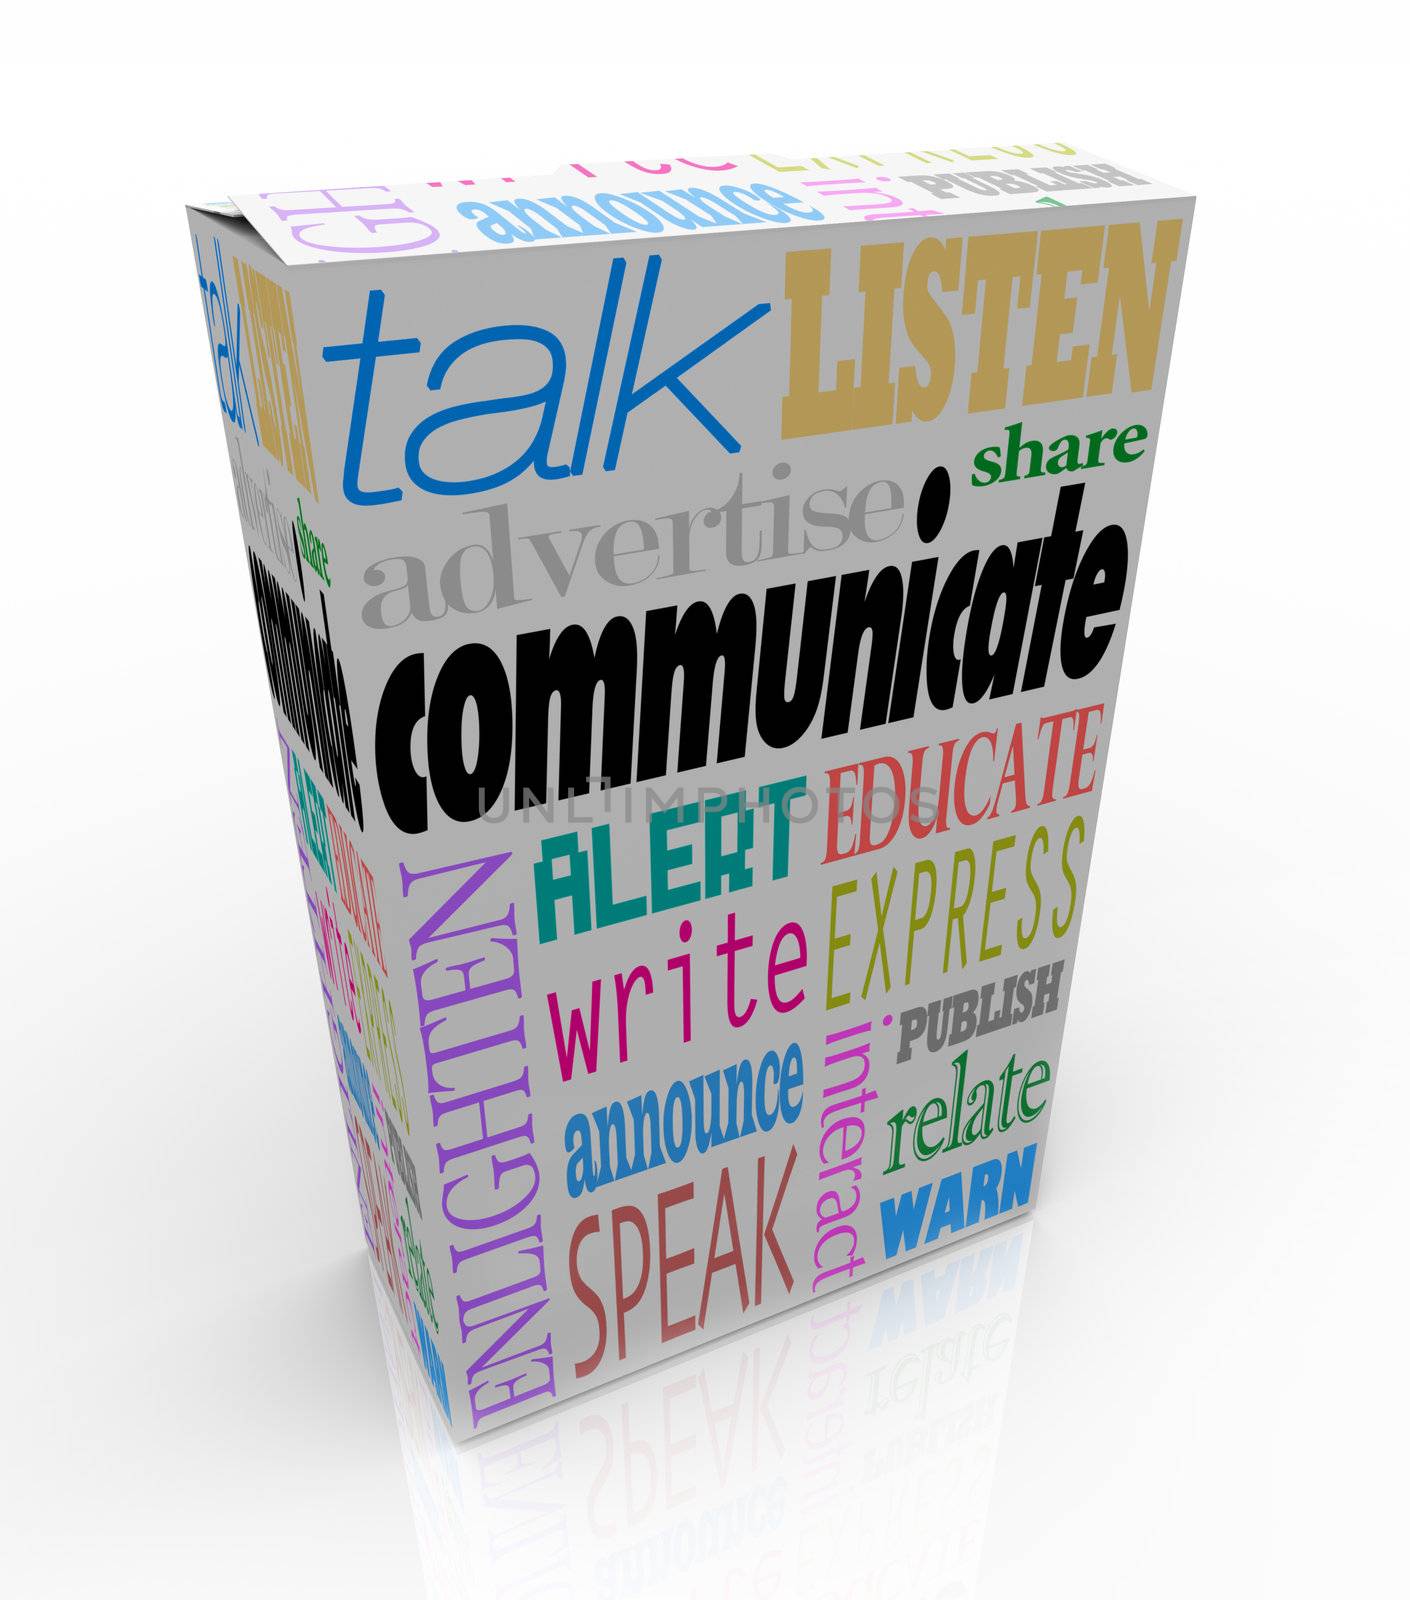 The word Communication on a box along with many other related words such as talk, listen, advertise, announce, warn, alert, enlighten and others to symbolize the sharing of thoughts and ideas